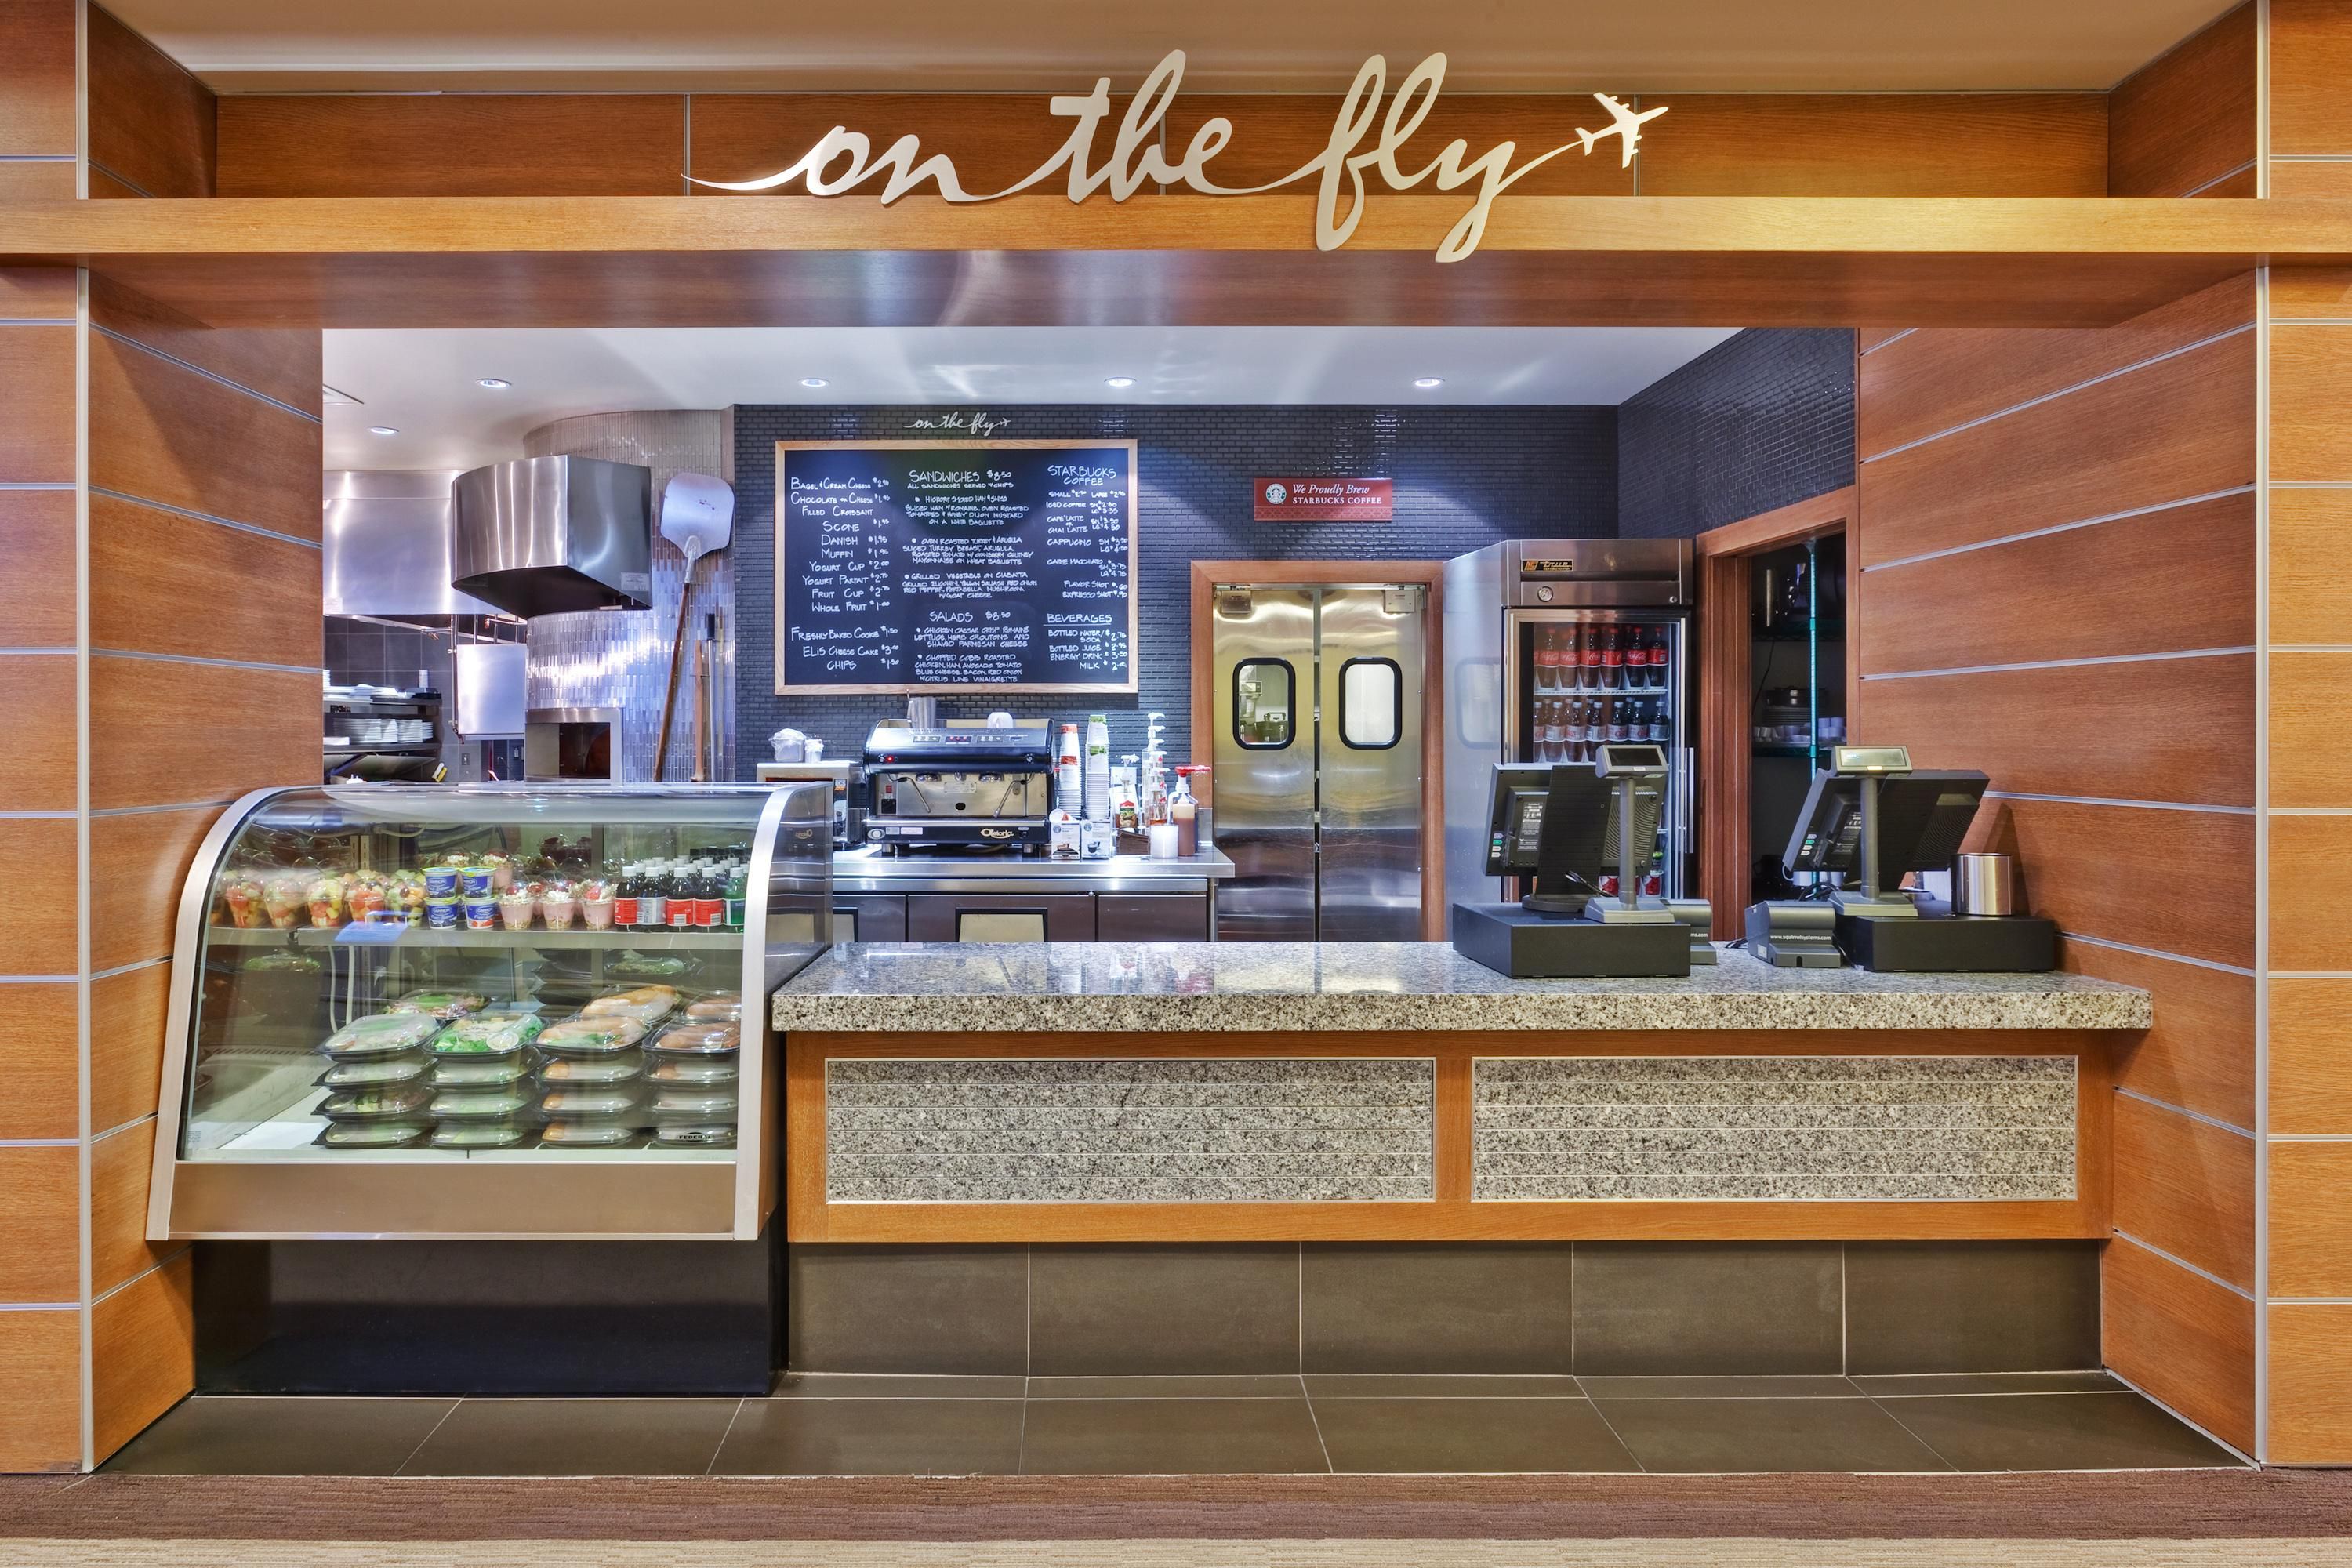 Stop by On the Fly for delicious American cuisine options